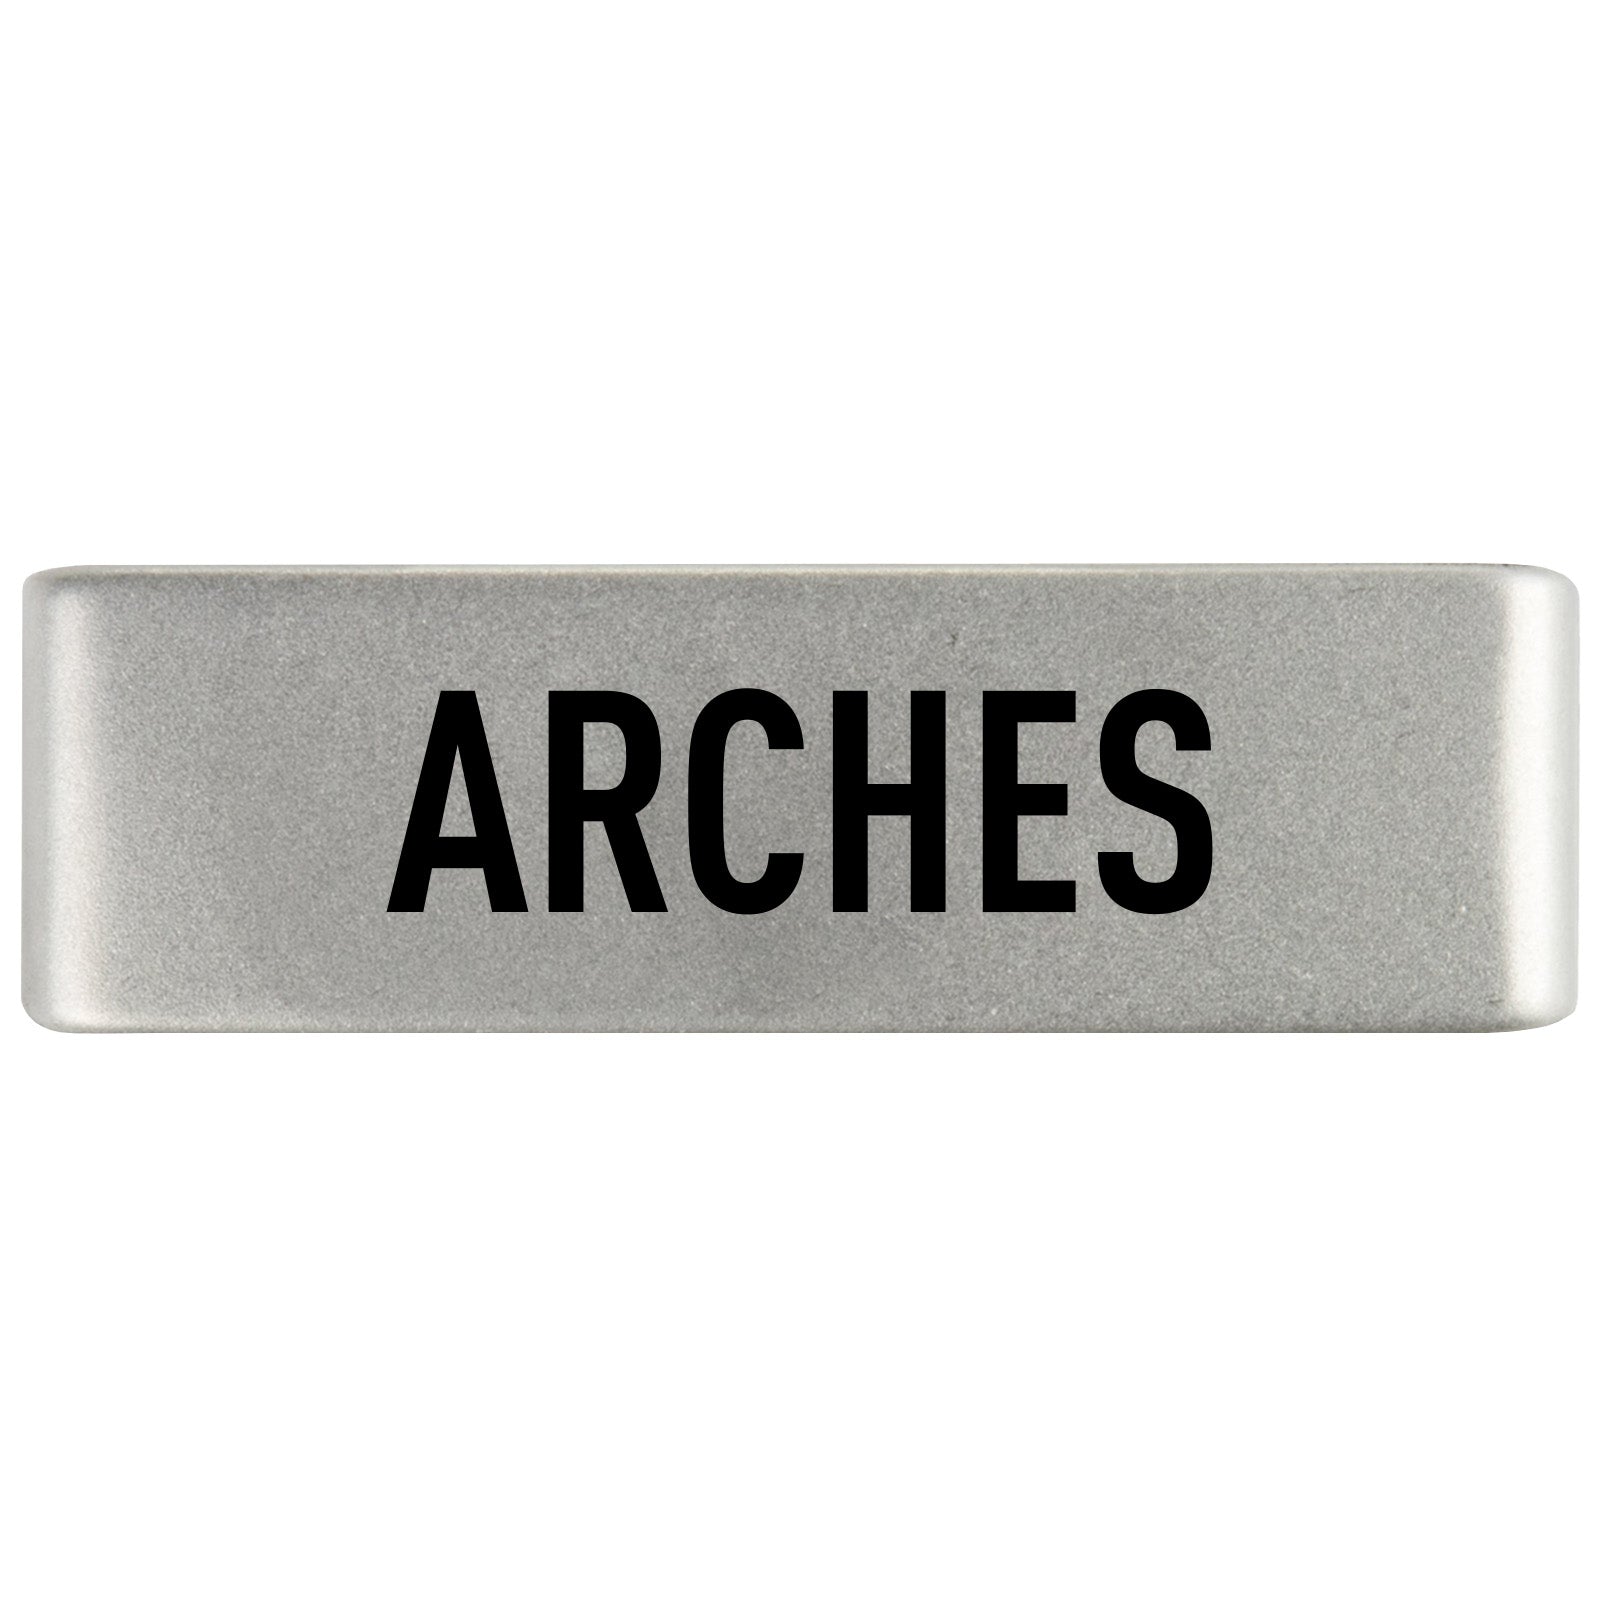 Arches Badge Badge 19mm - ROAD iD